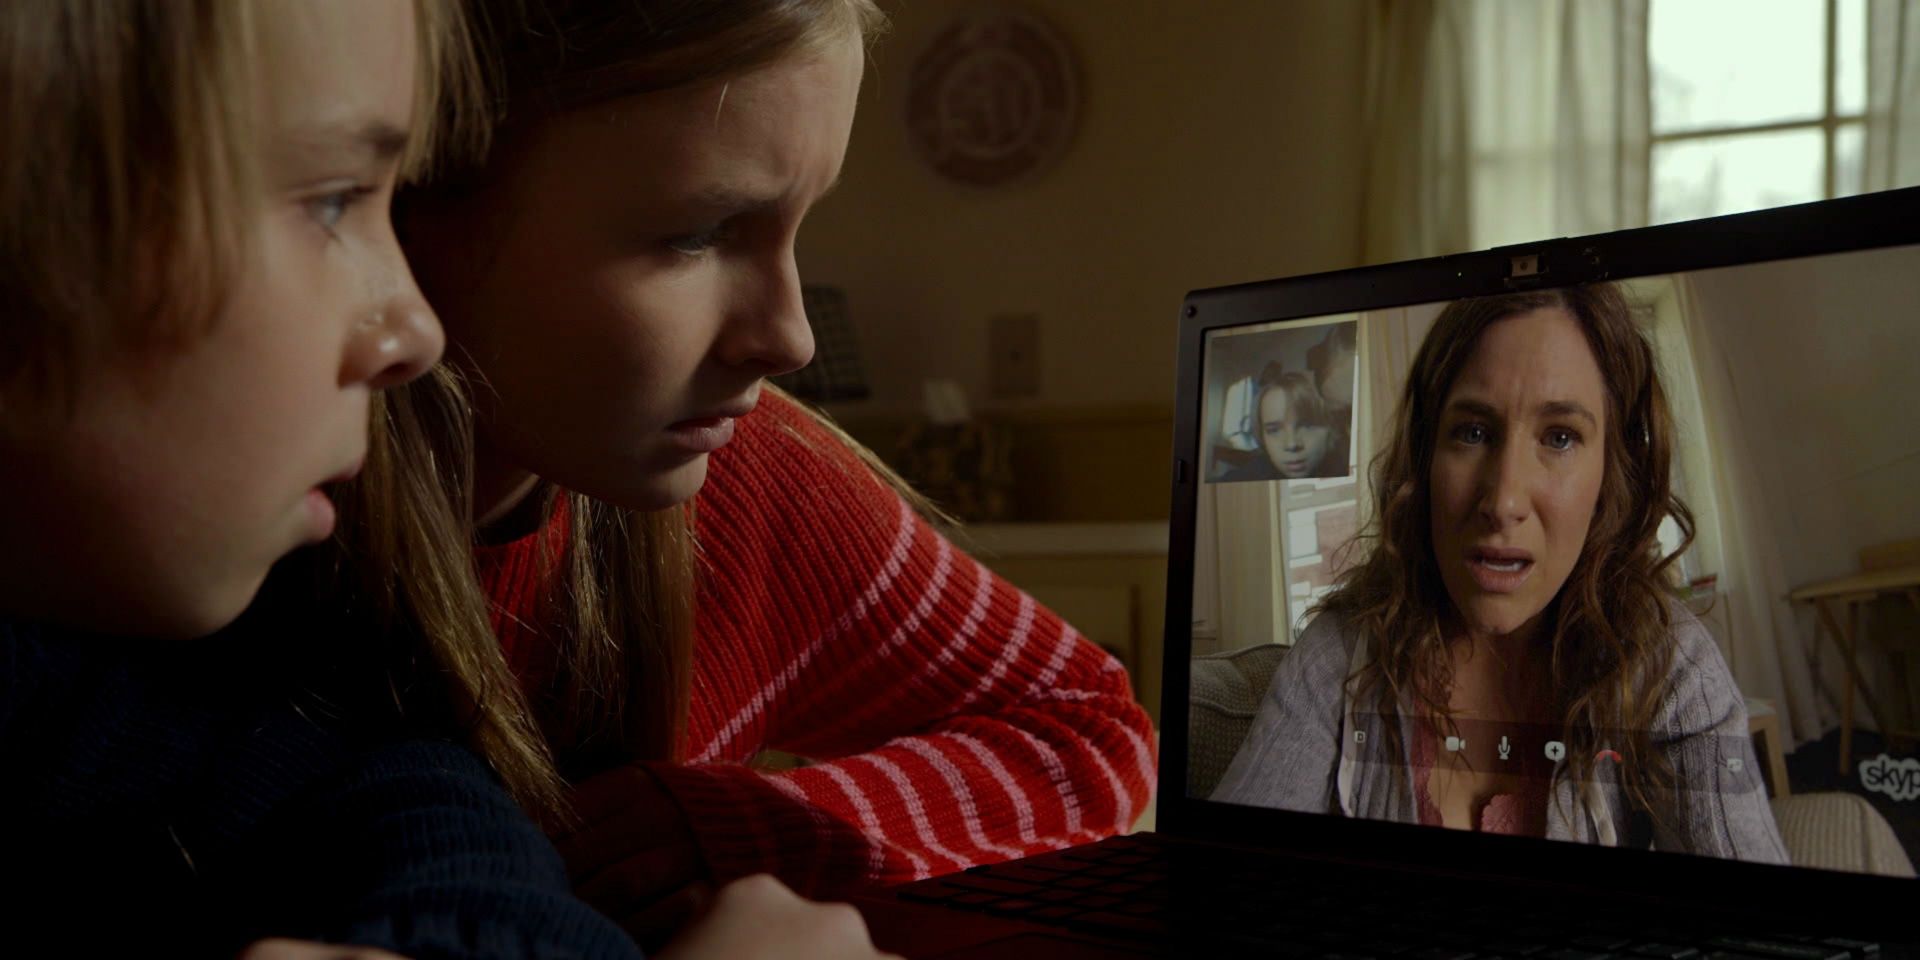 The Visit's Tyler and Becca talk to Loretta on a computer screen